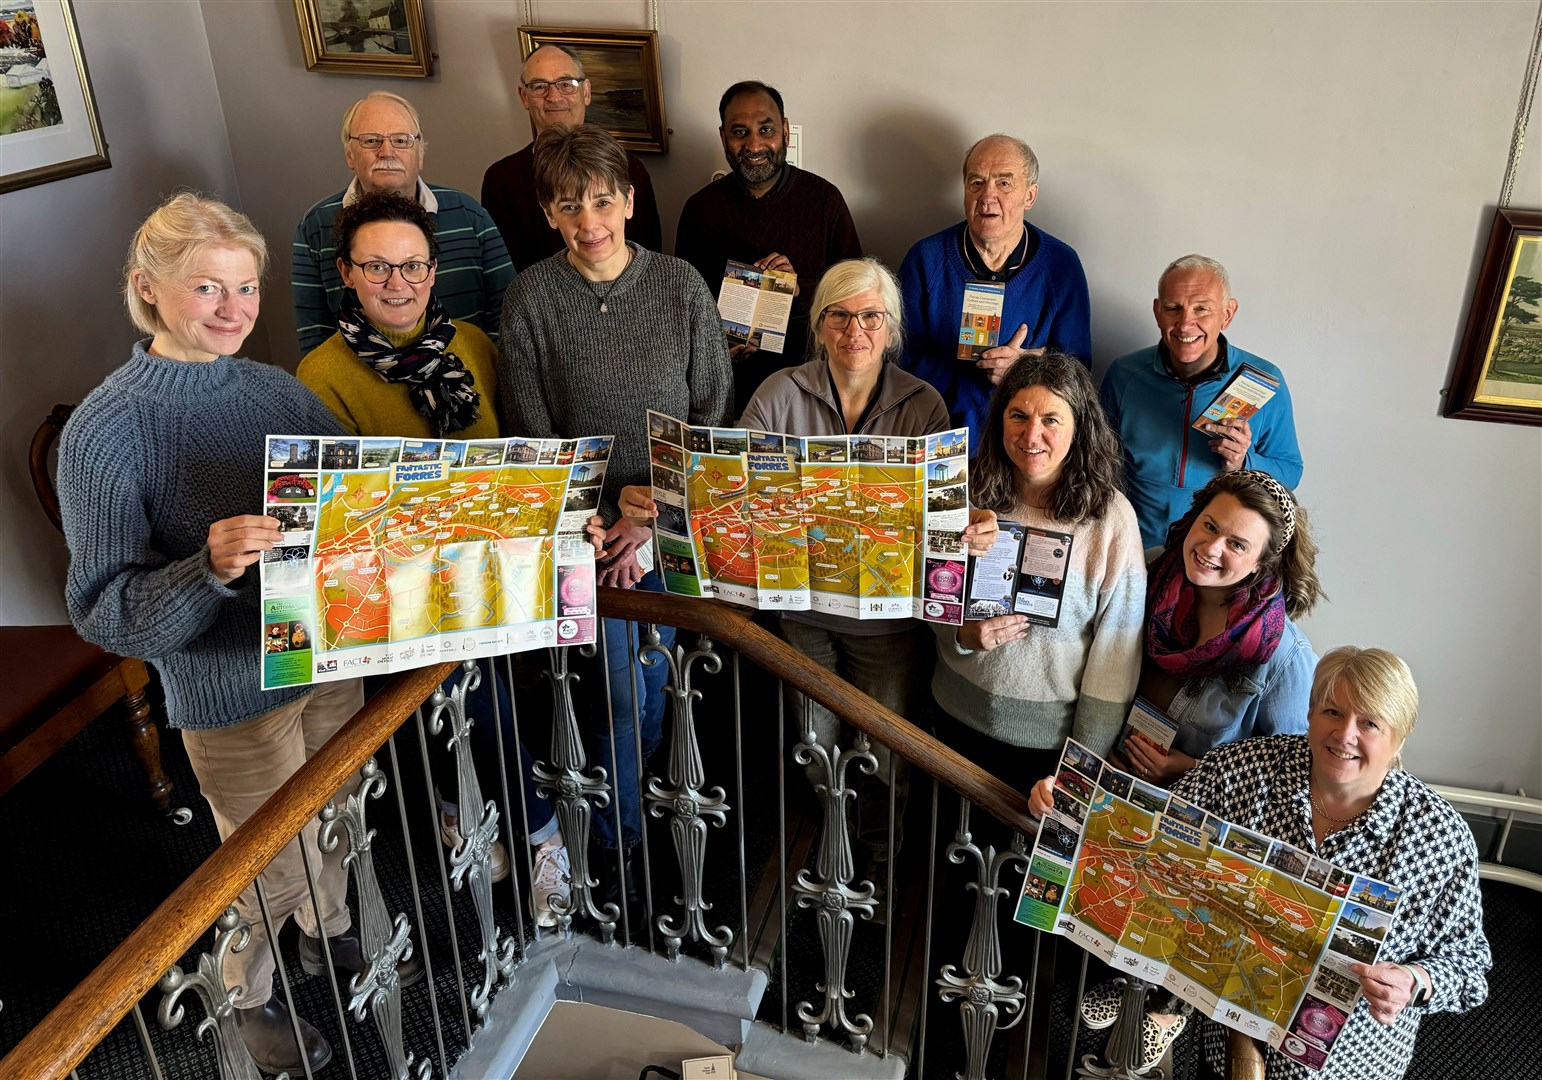 Representatives of organisations involved in the Forres Connected – Culture and Heritage project.